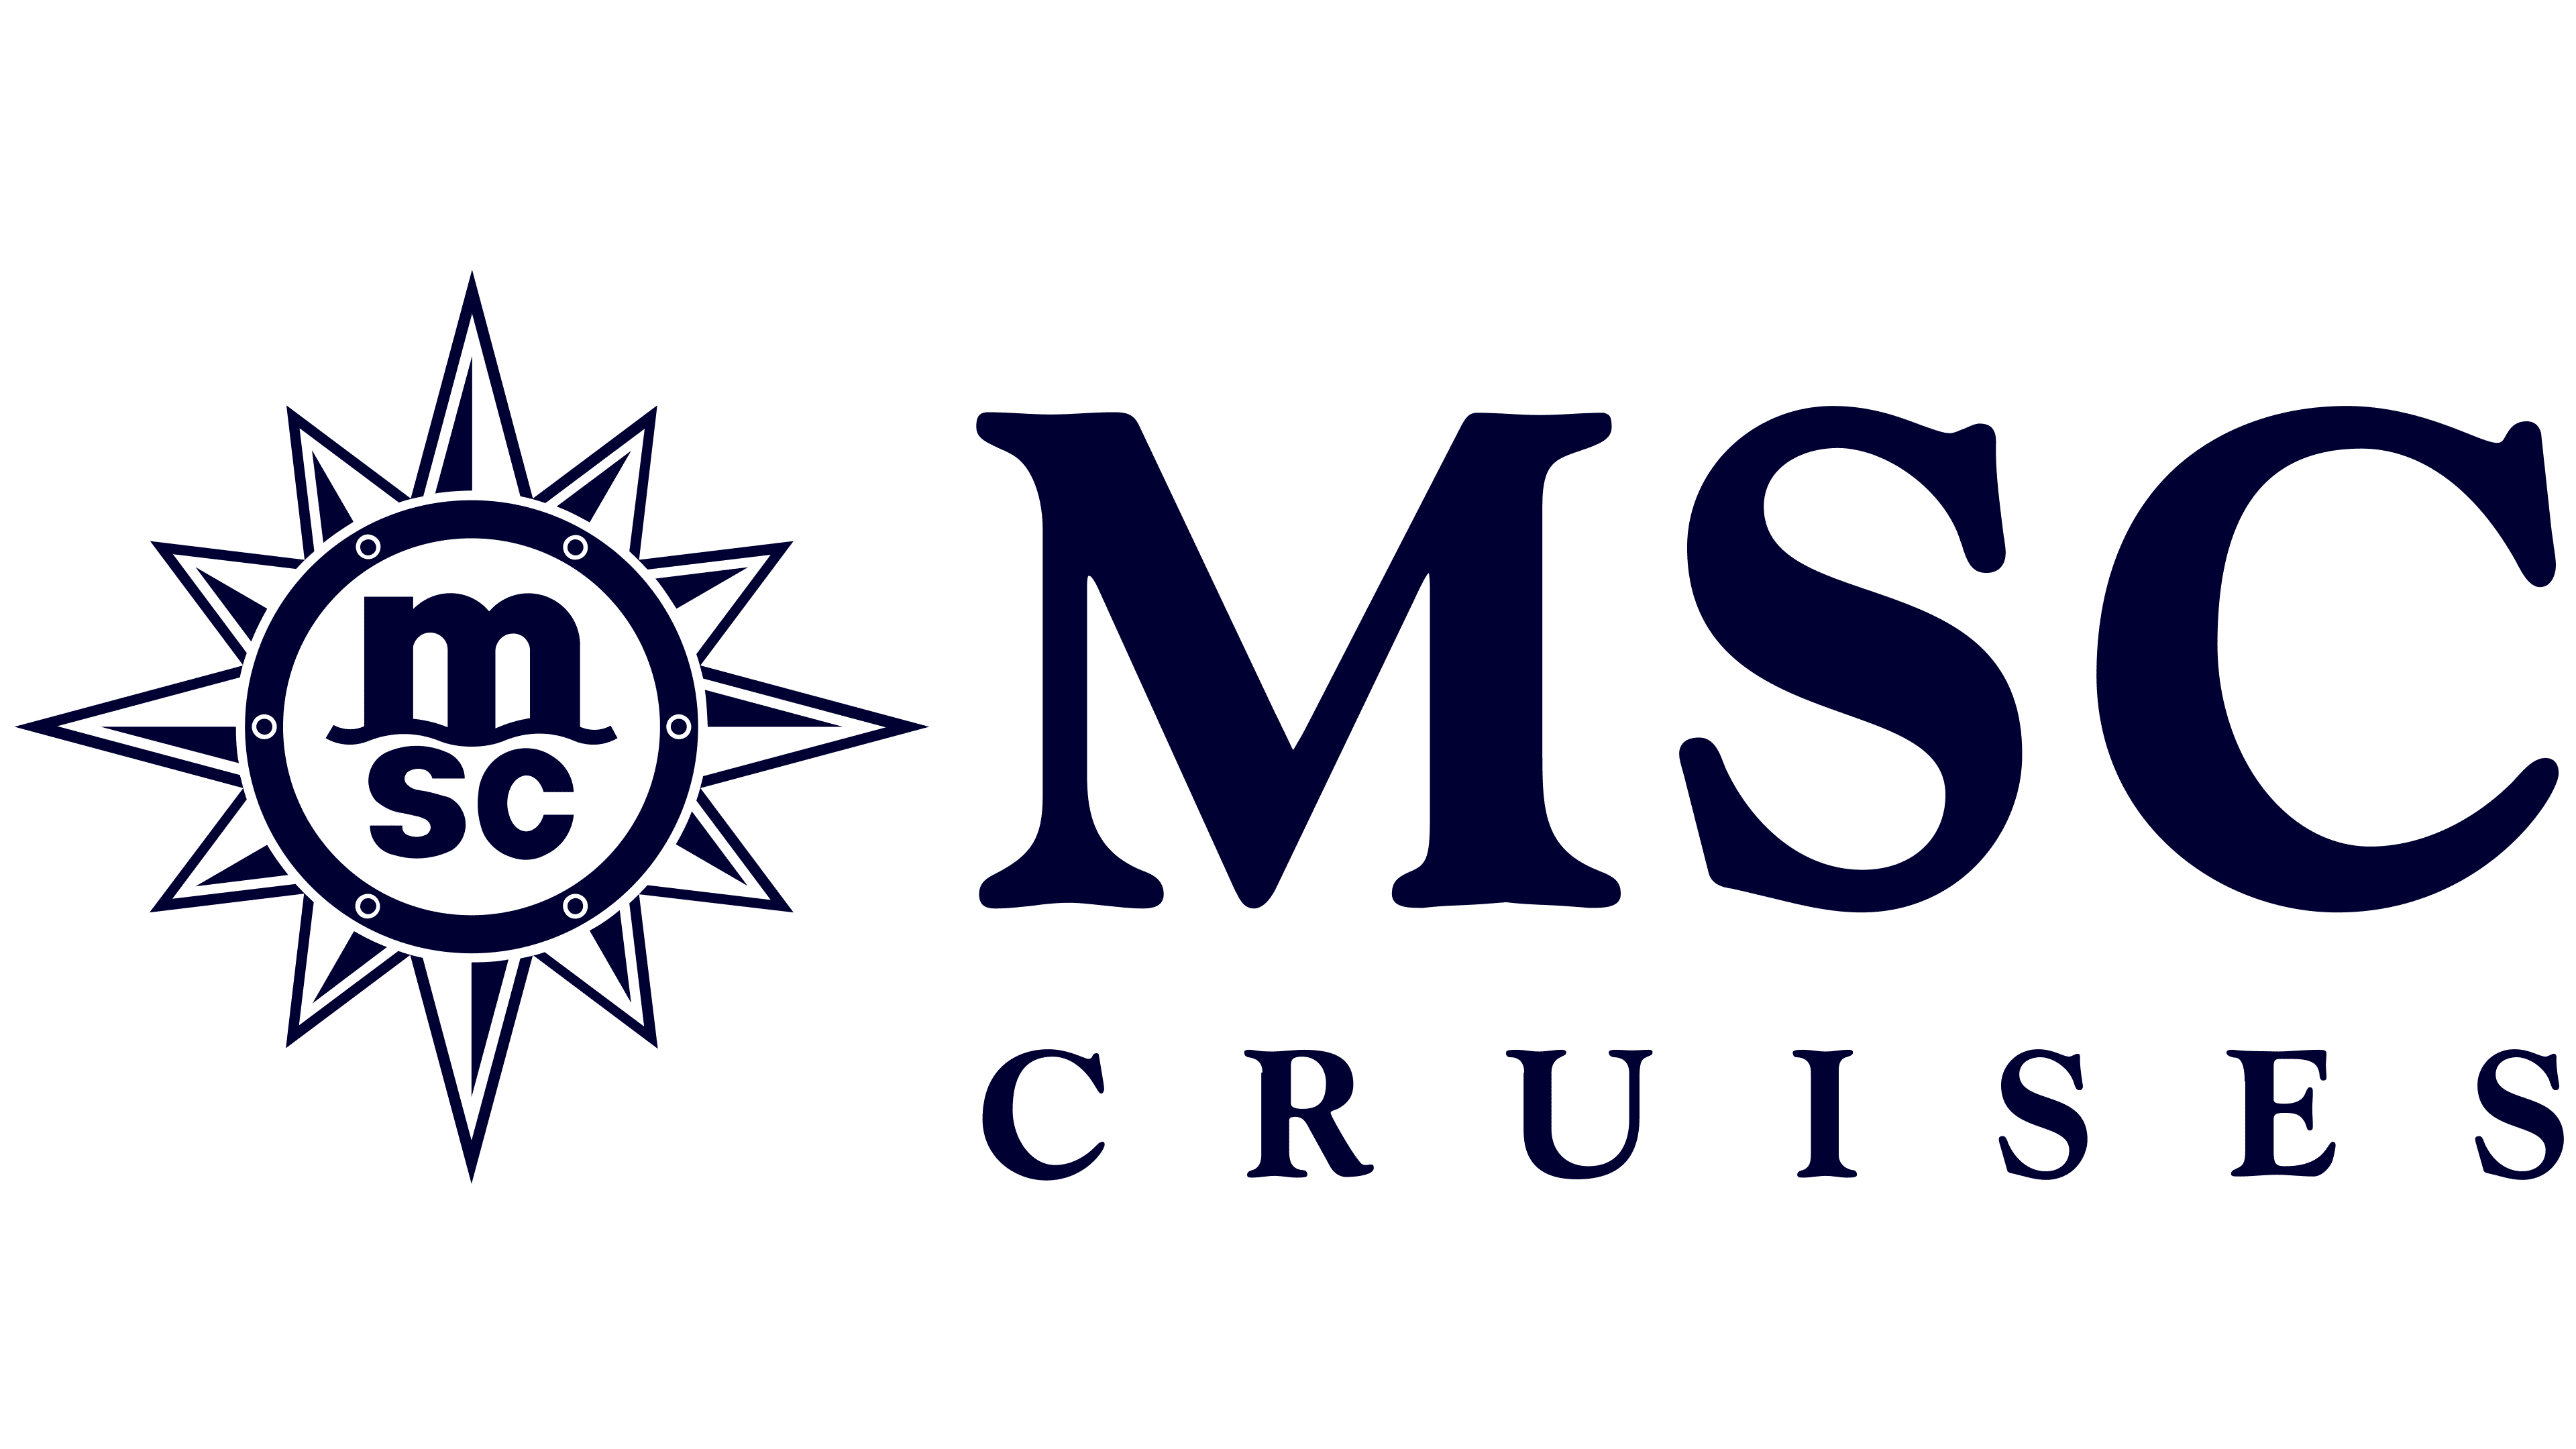 MSC Logo and symbol, meaning, history, PNG, brand | Msc cruises, Msc, Cruise